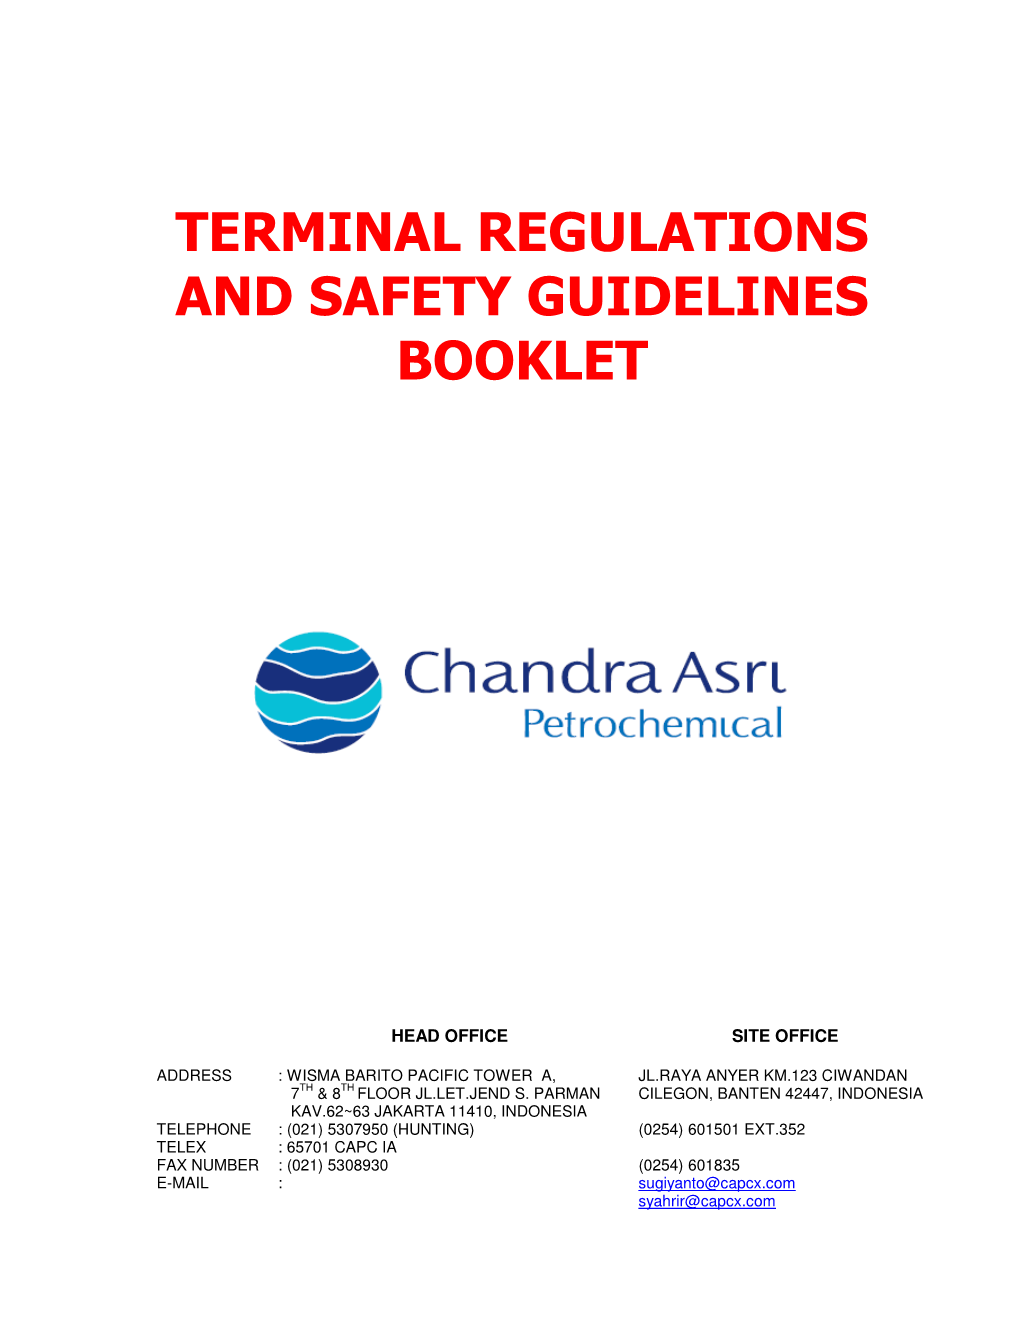 Terminal Regulations and Safety Guidelines Booklet